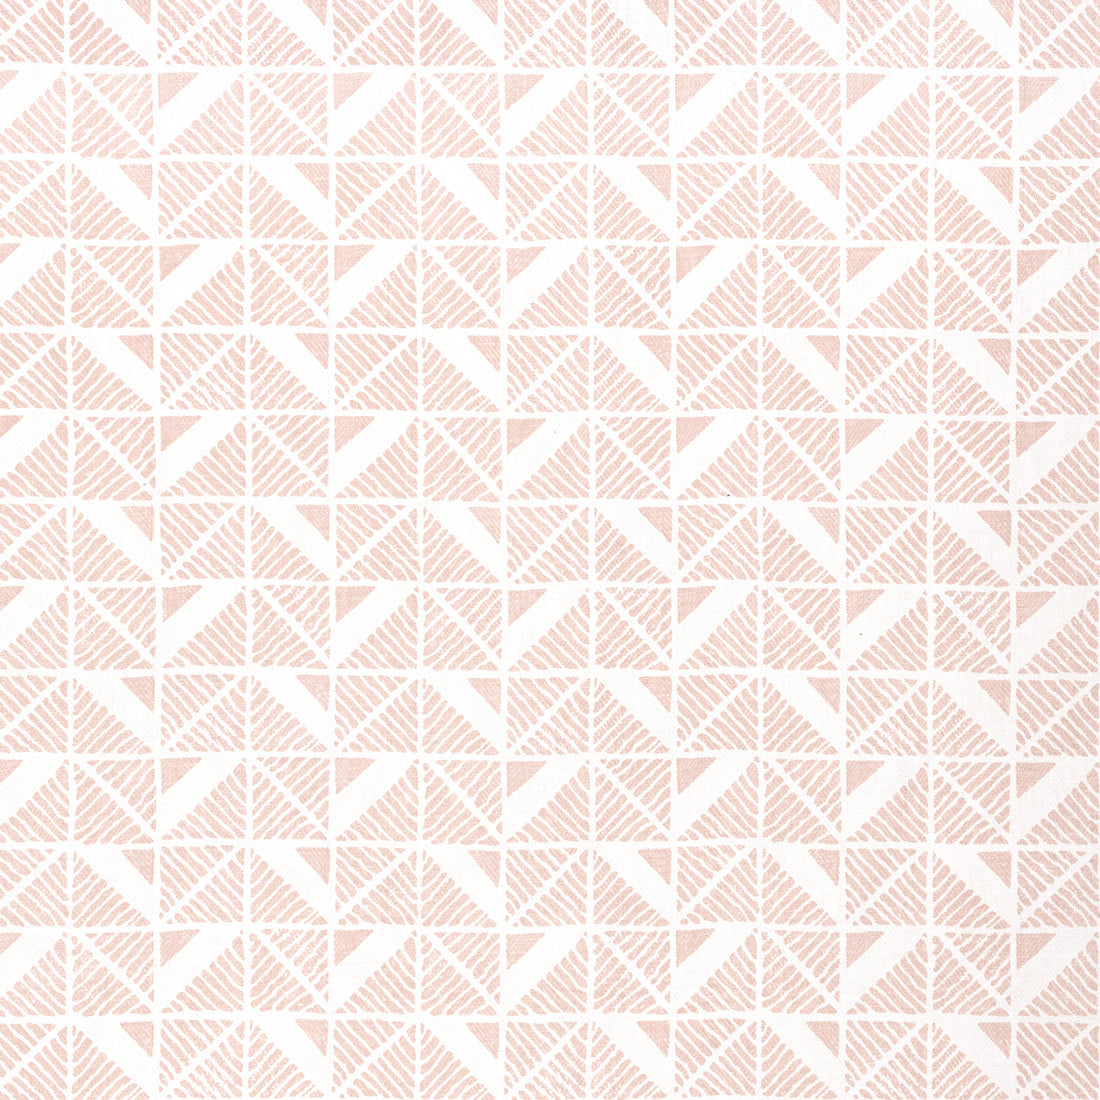 Bloomsbury Square fabric in blush color - pattern number AF23113 - by Anna French in the Willow Tree collection